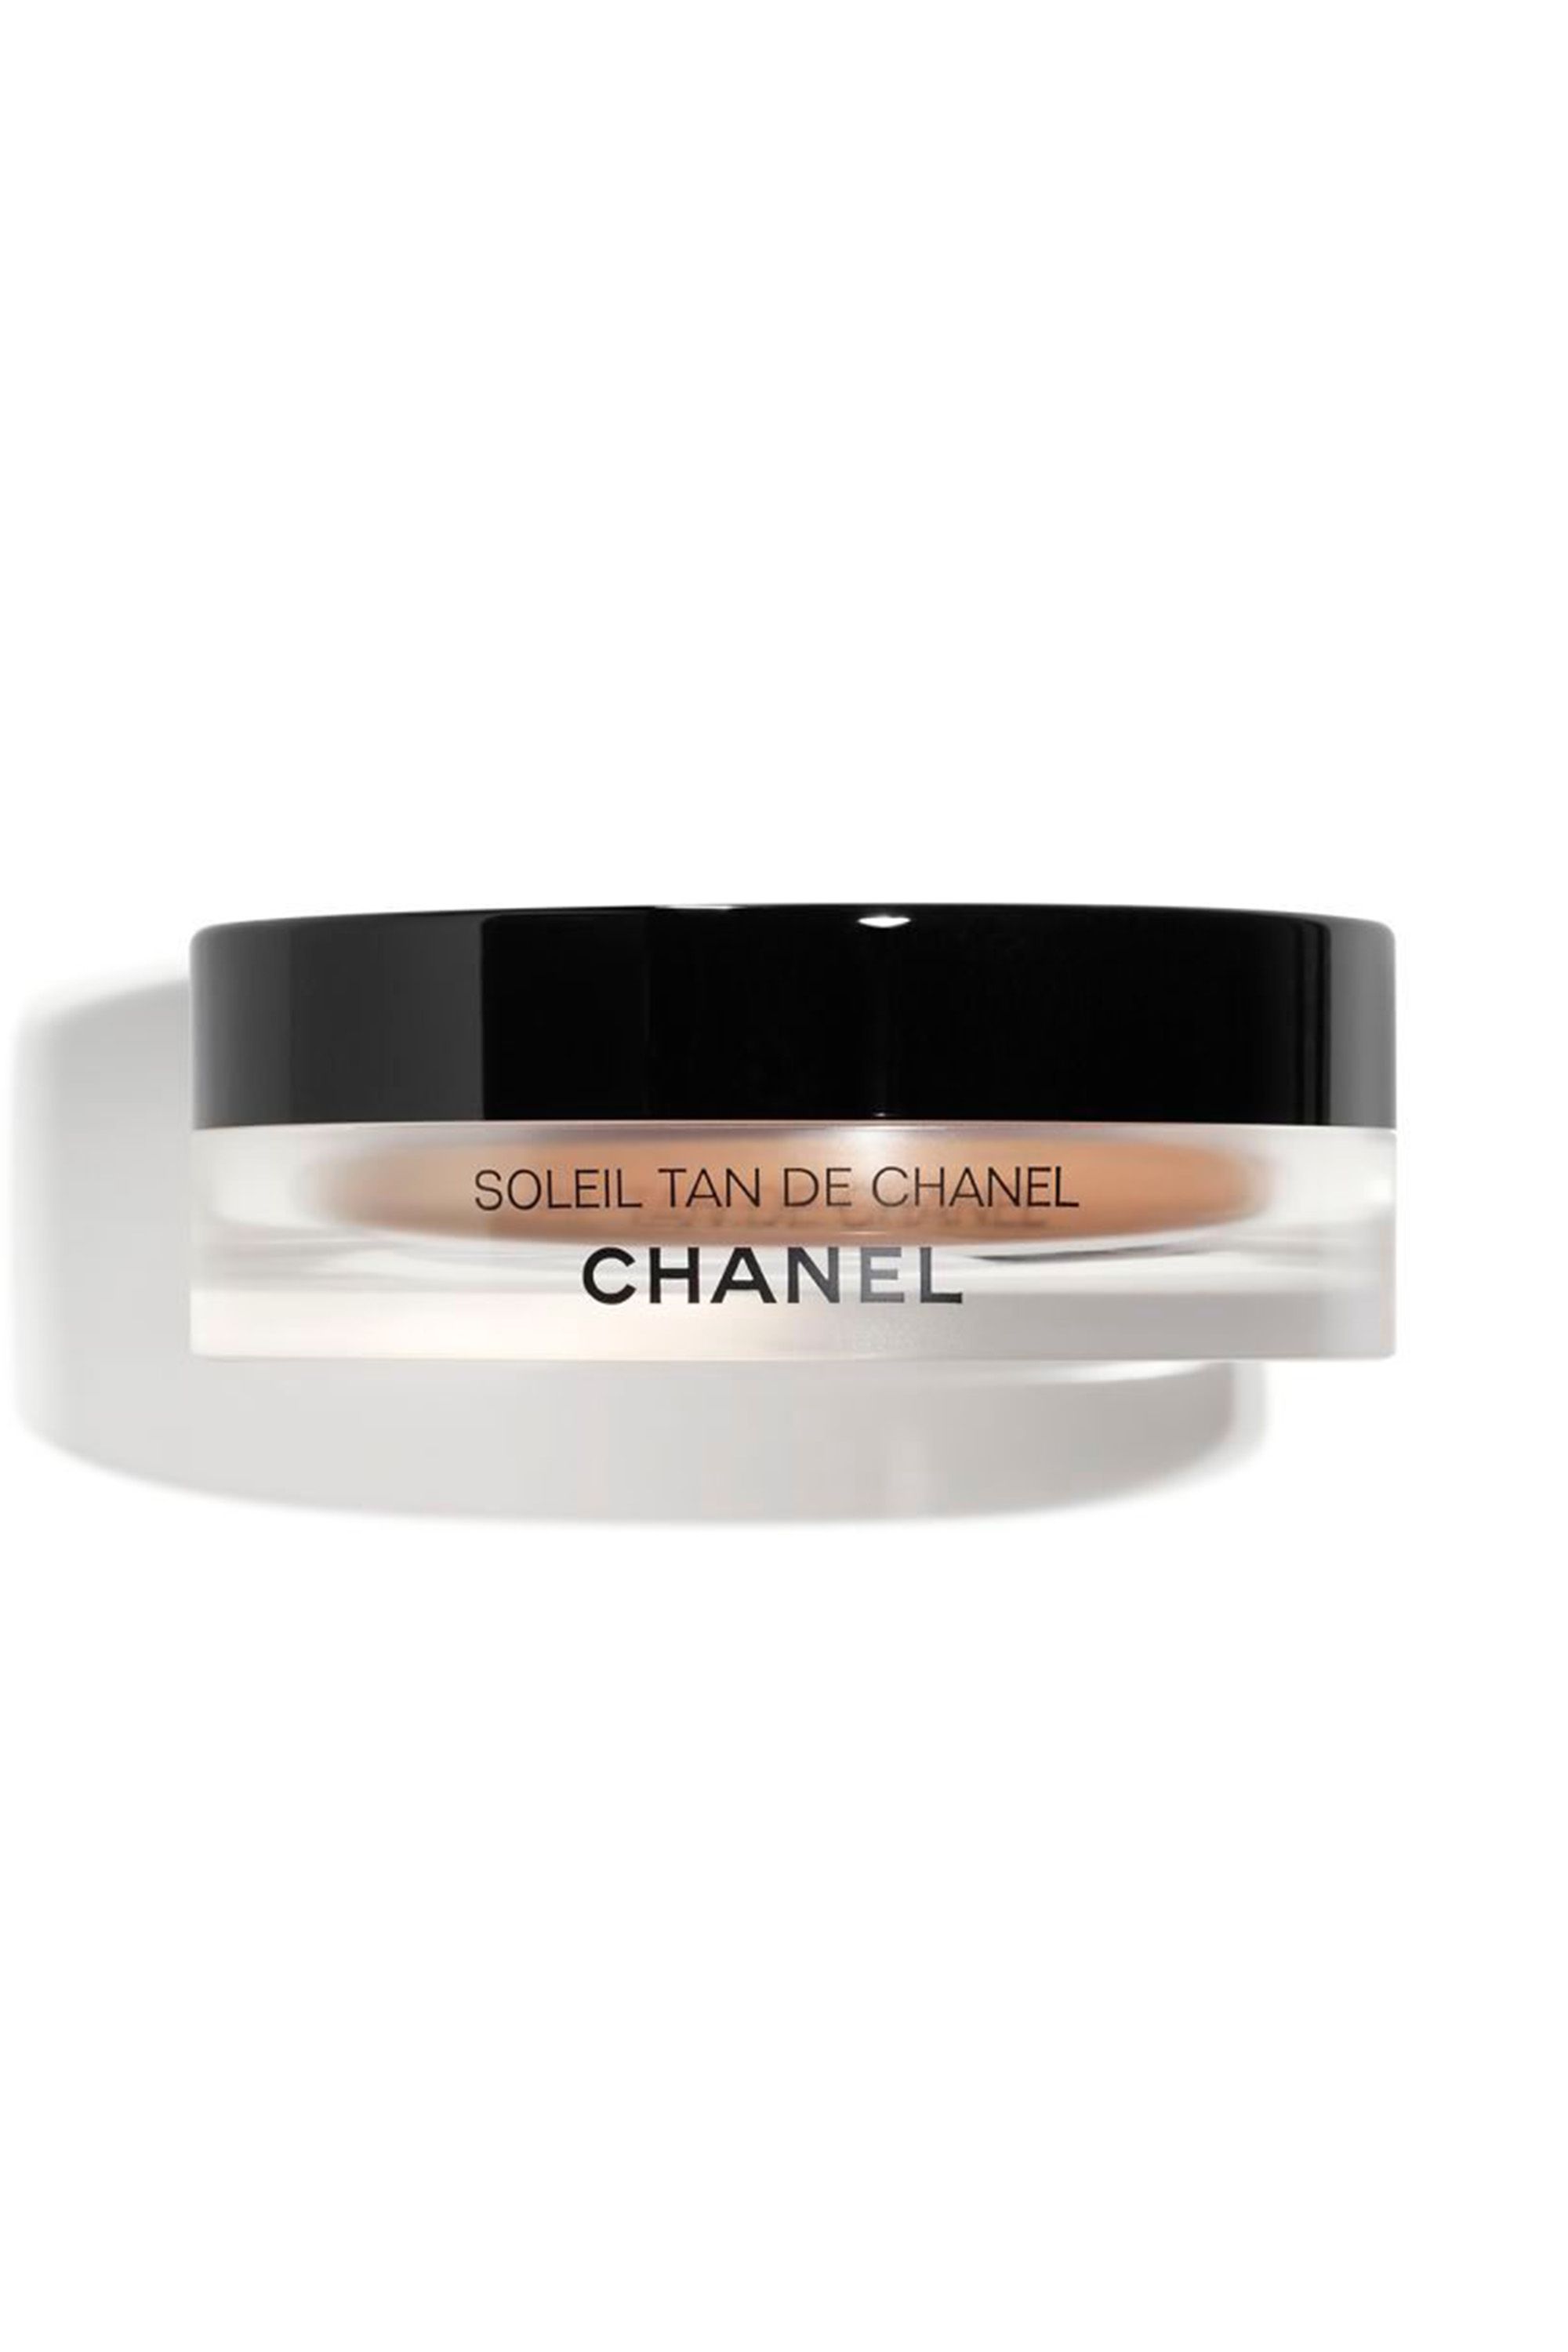 BeautyBestSellers  Chanel's 10 best-selling beauty products